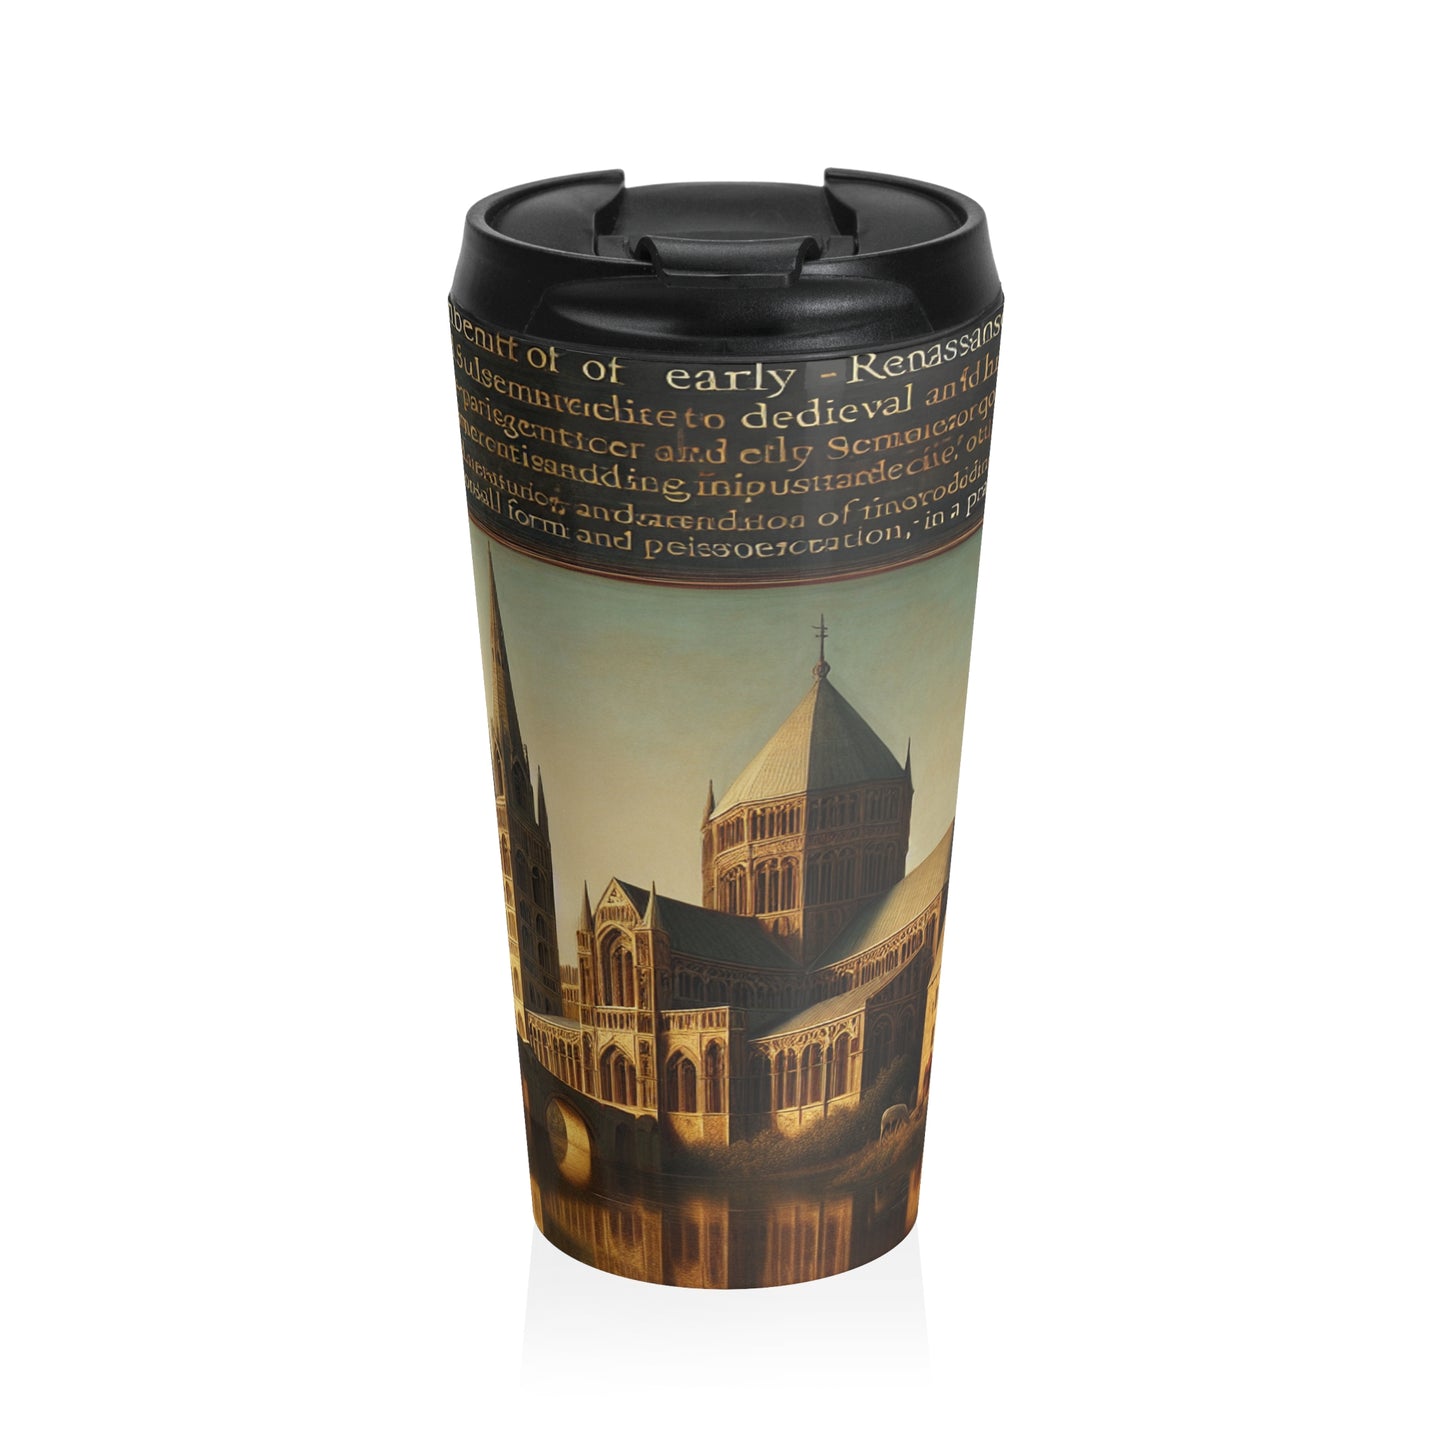 "Intellectual Discourse in the City Square" - The Alien Stainless Steel Travel Mug Proto-Renaissance